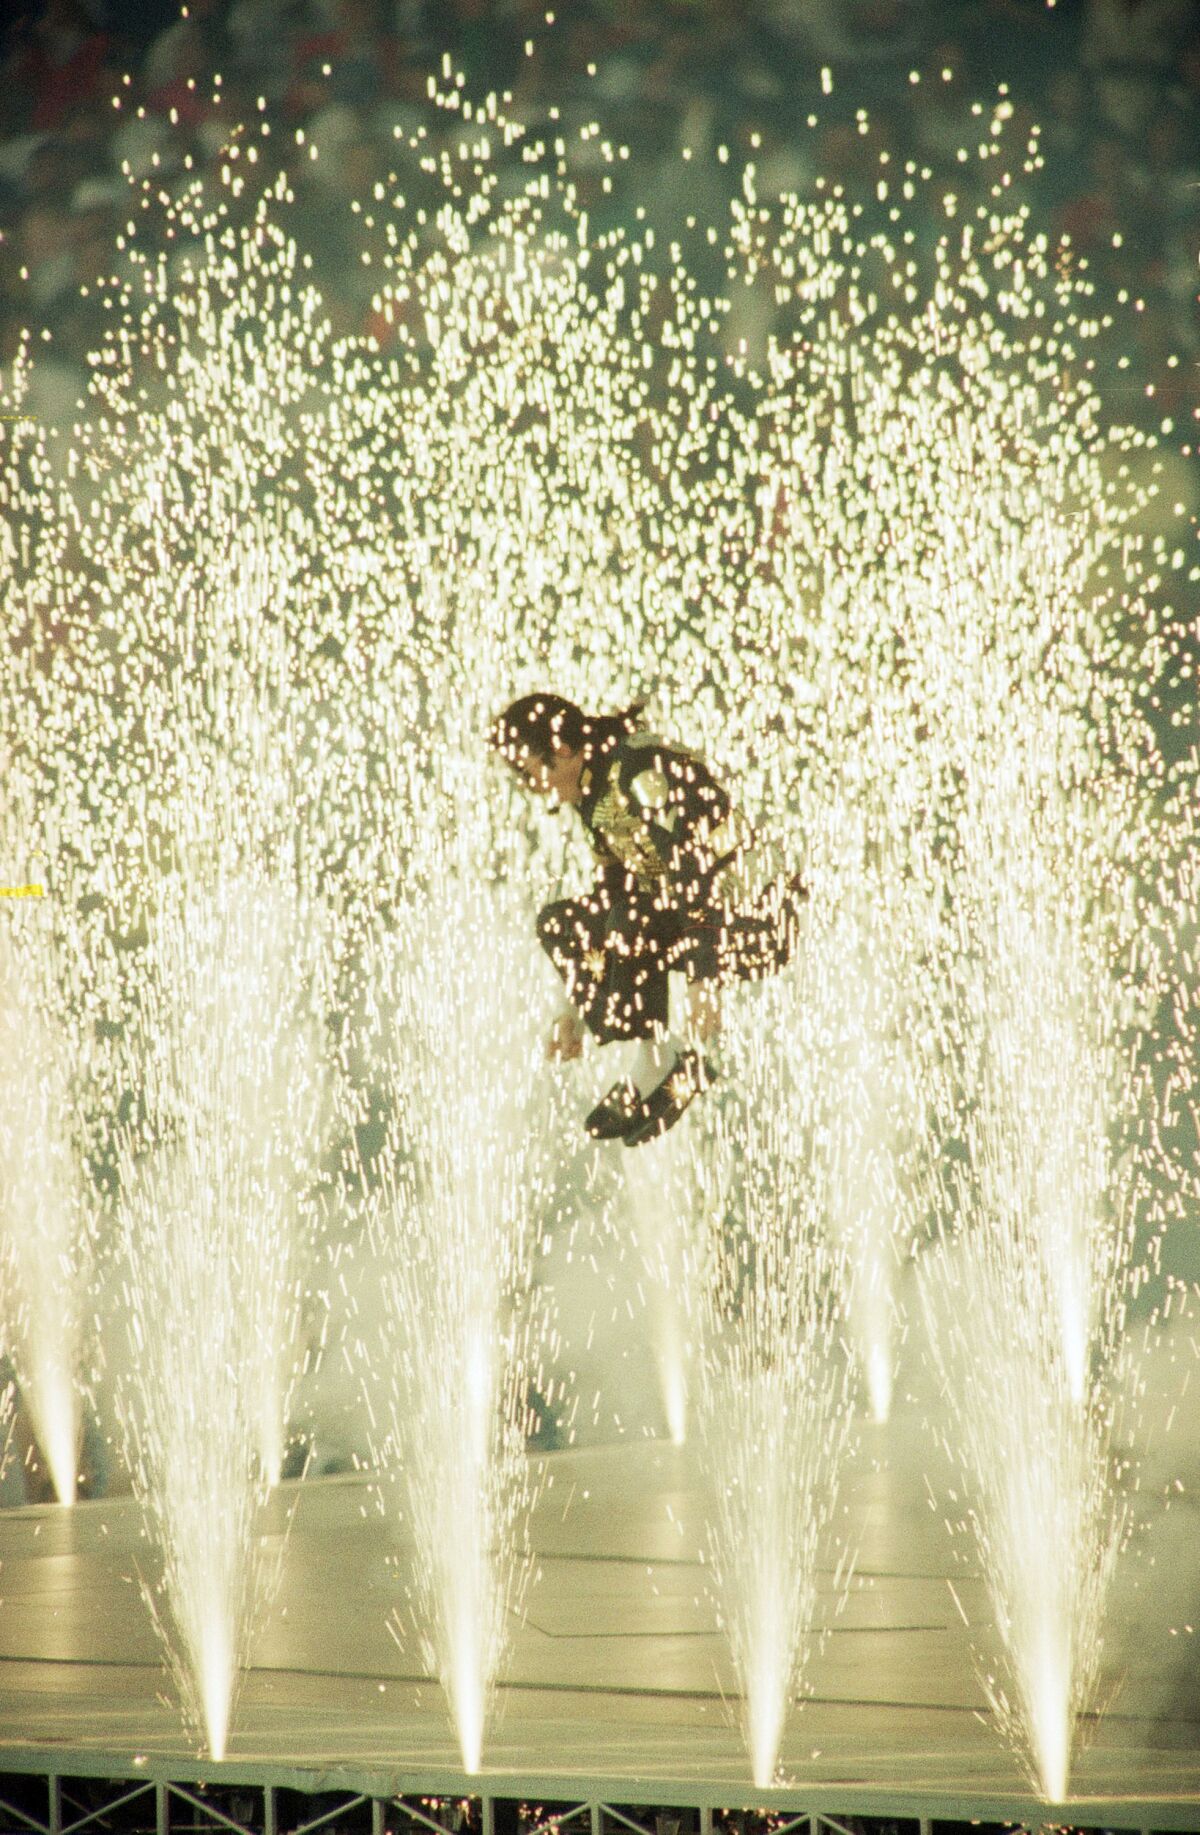 Michael Jackson leaps among the pyrotechnics during the halftime show at Super Bowl XXVII.